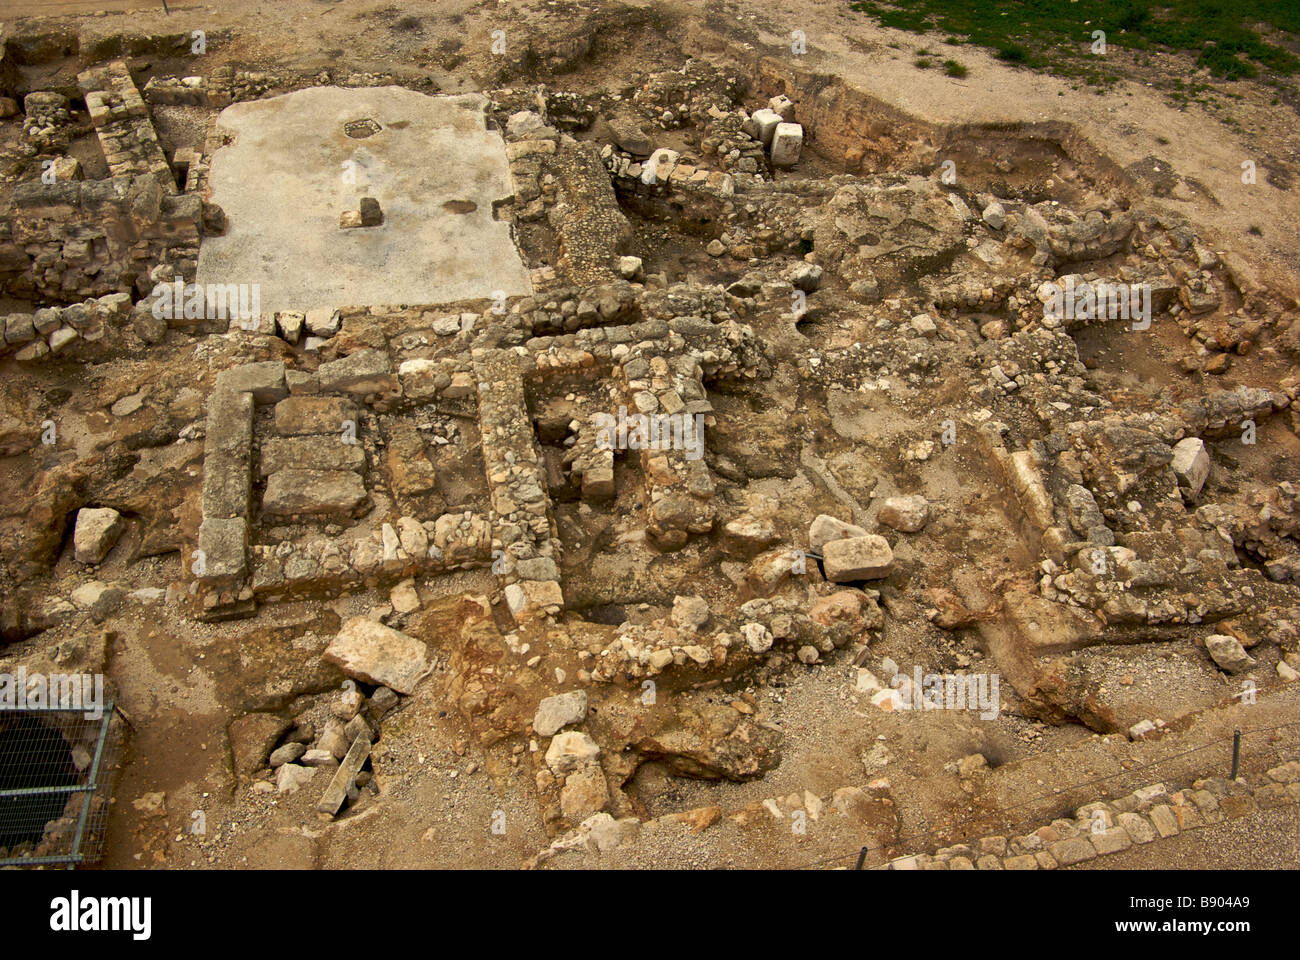 Archeological dig site with ancient building foundations of ancient house from mishnaic period city Zippori or Sepphoris Stock Photo